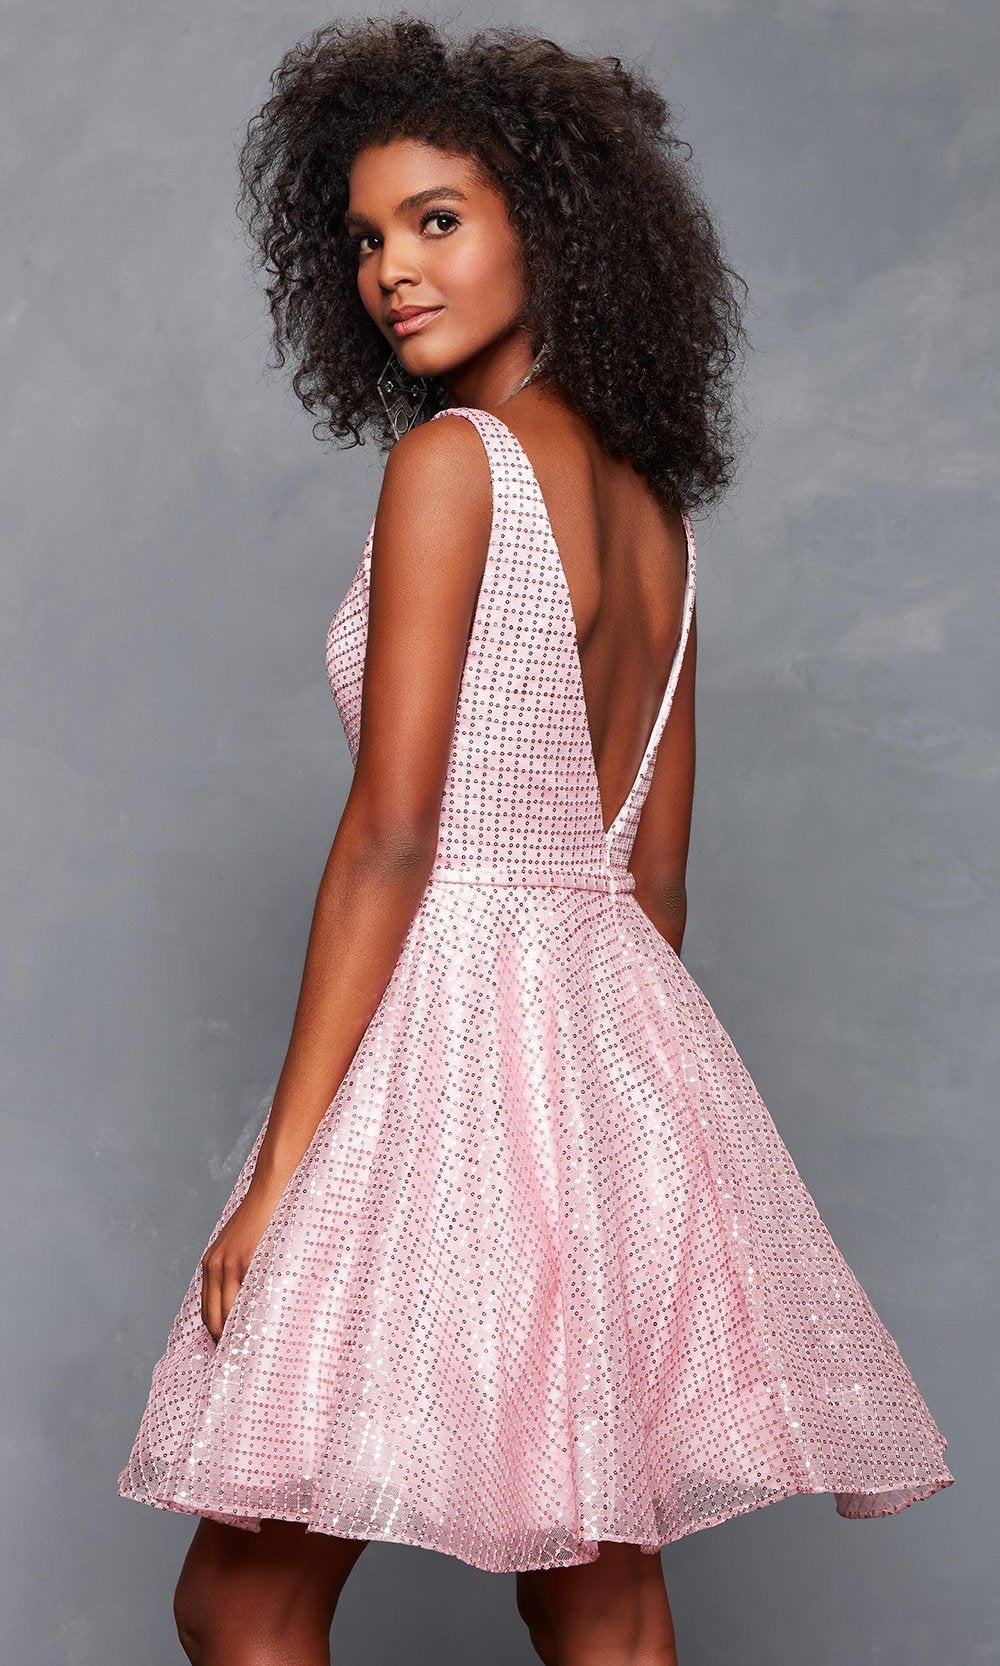 Clarisse - 3627 Allover Sequin Cutout Illusion Cocktail Dress in Pink